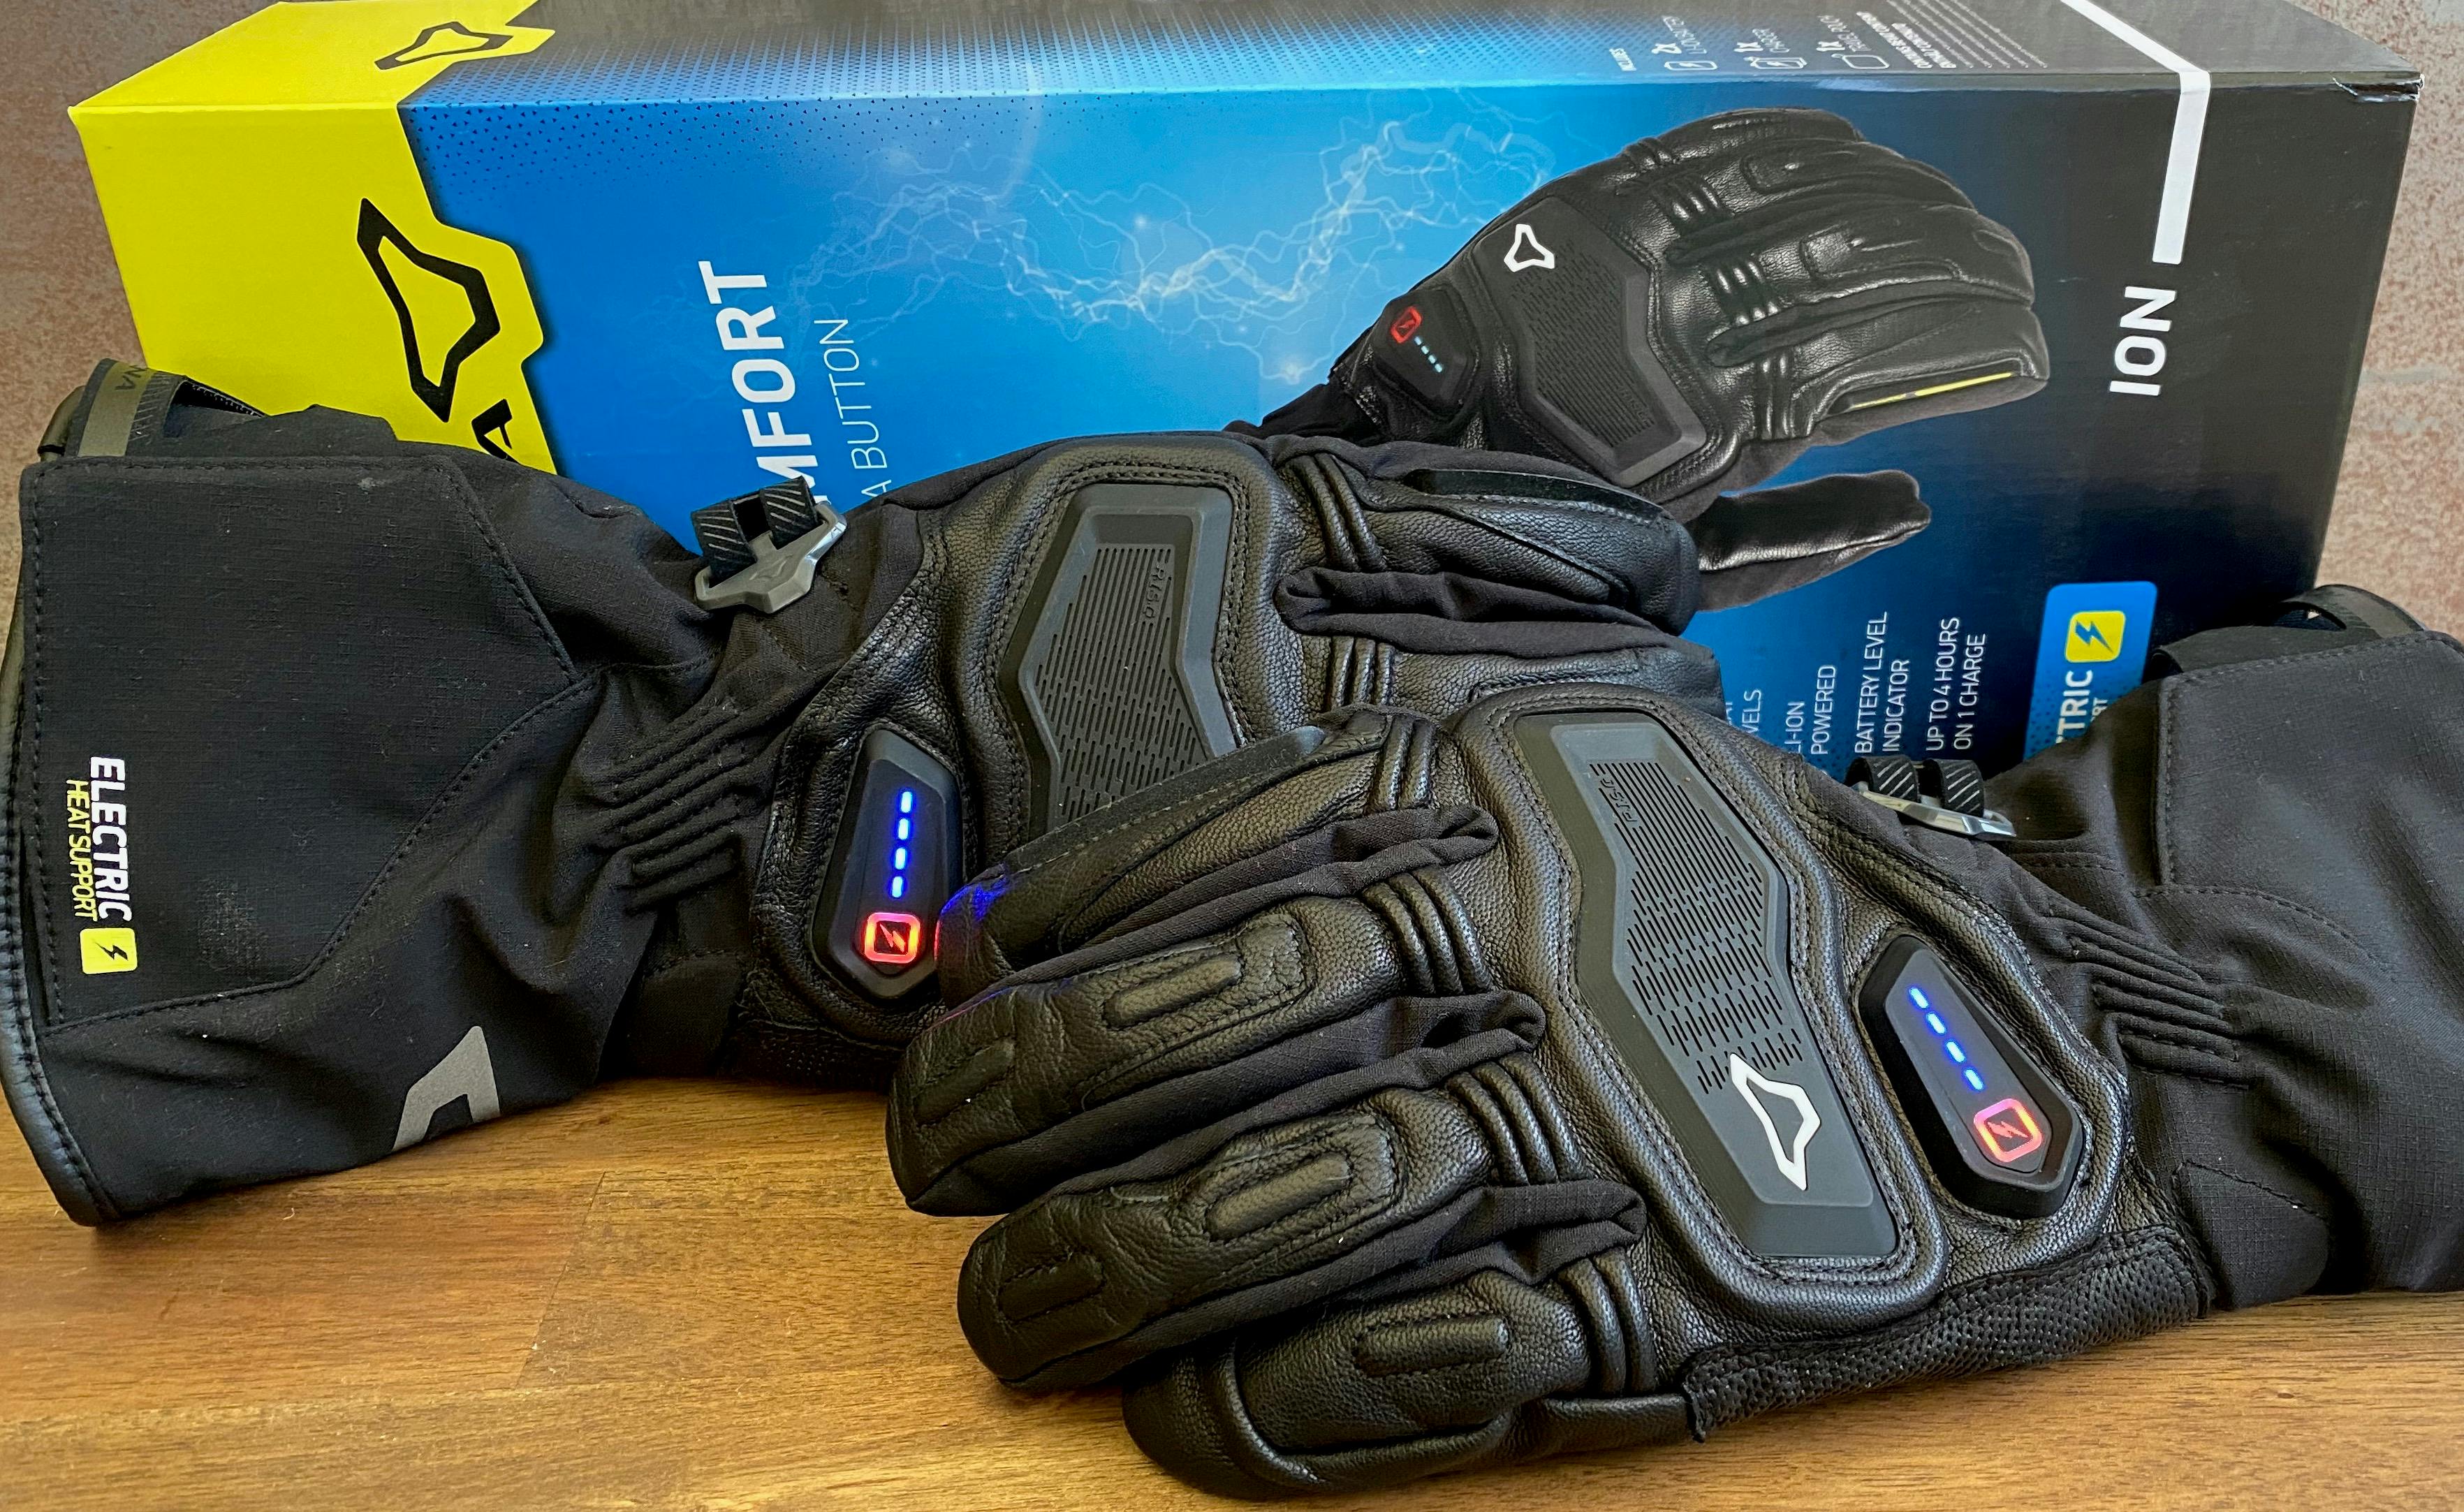 A pair of Macna Ion gloves in front of their blue and yellow box